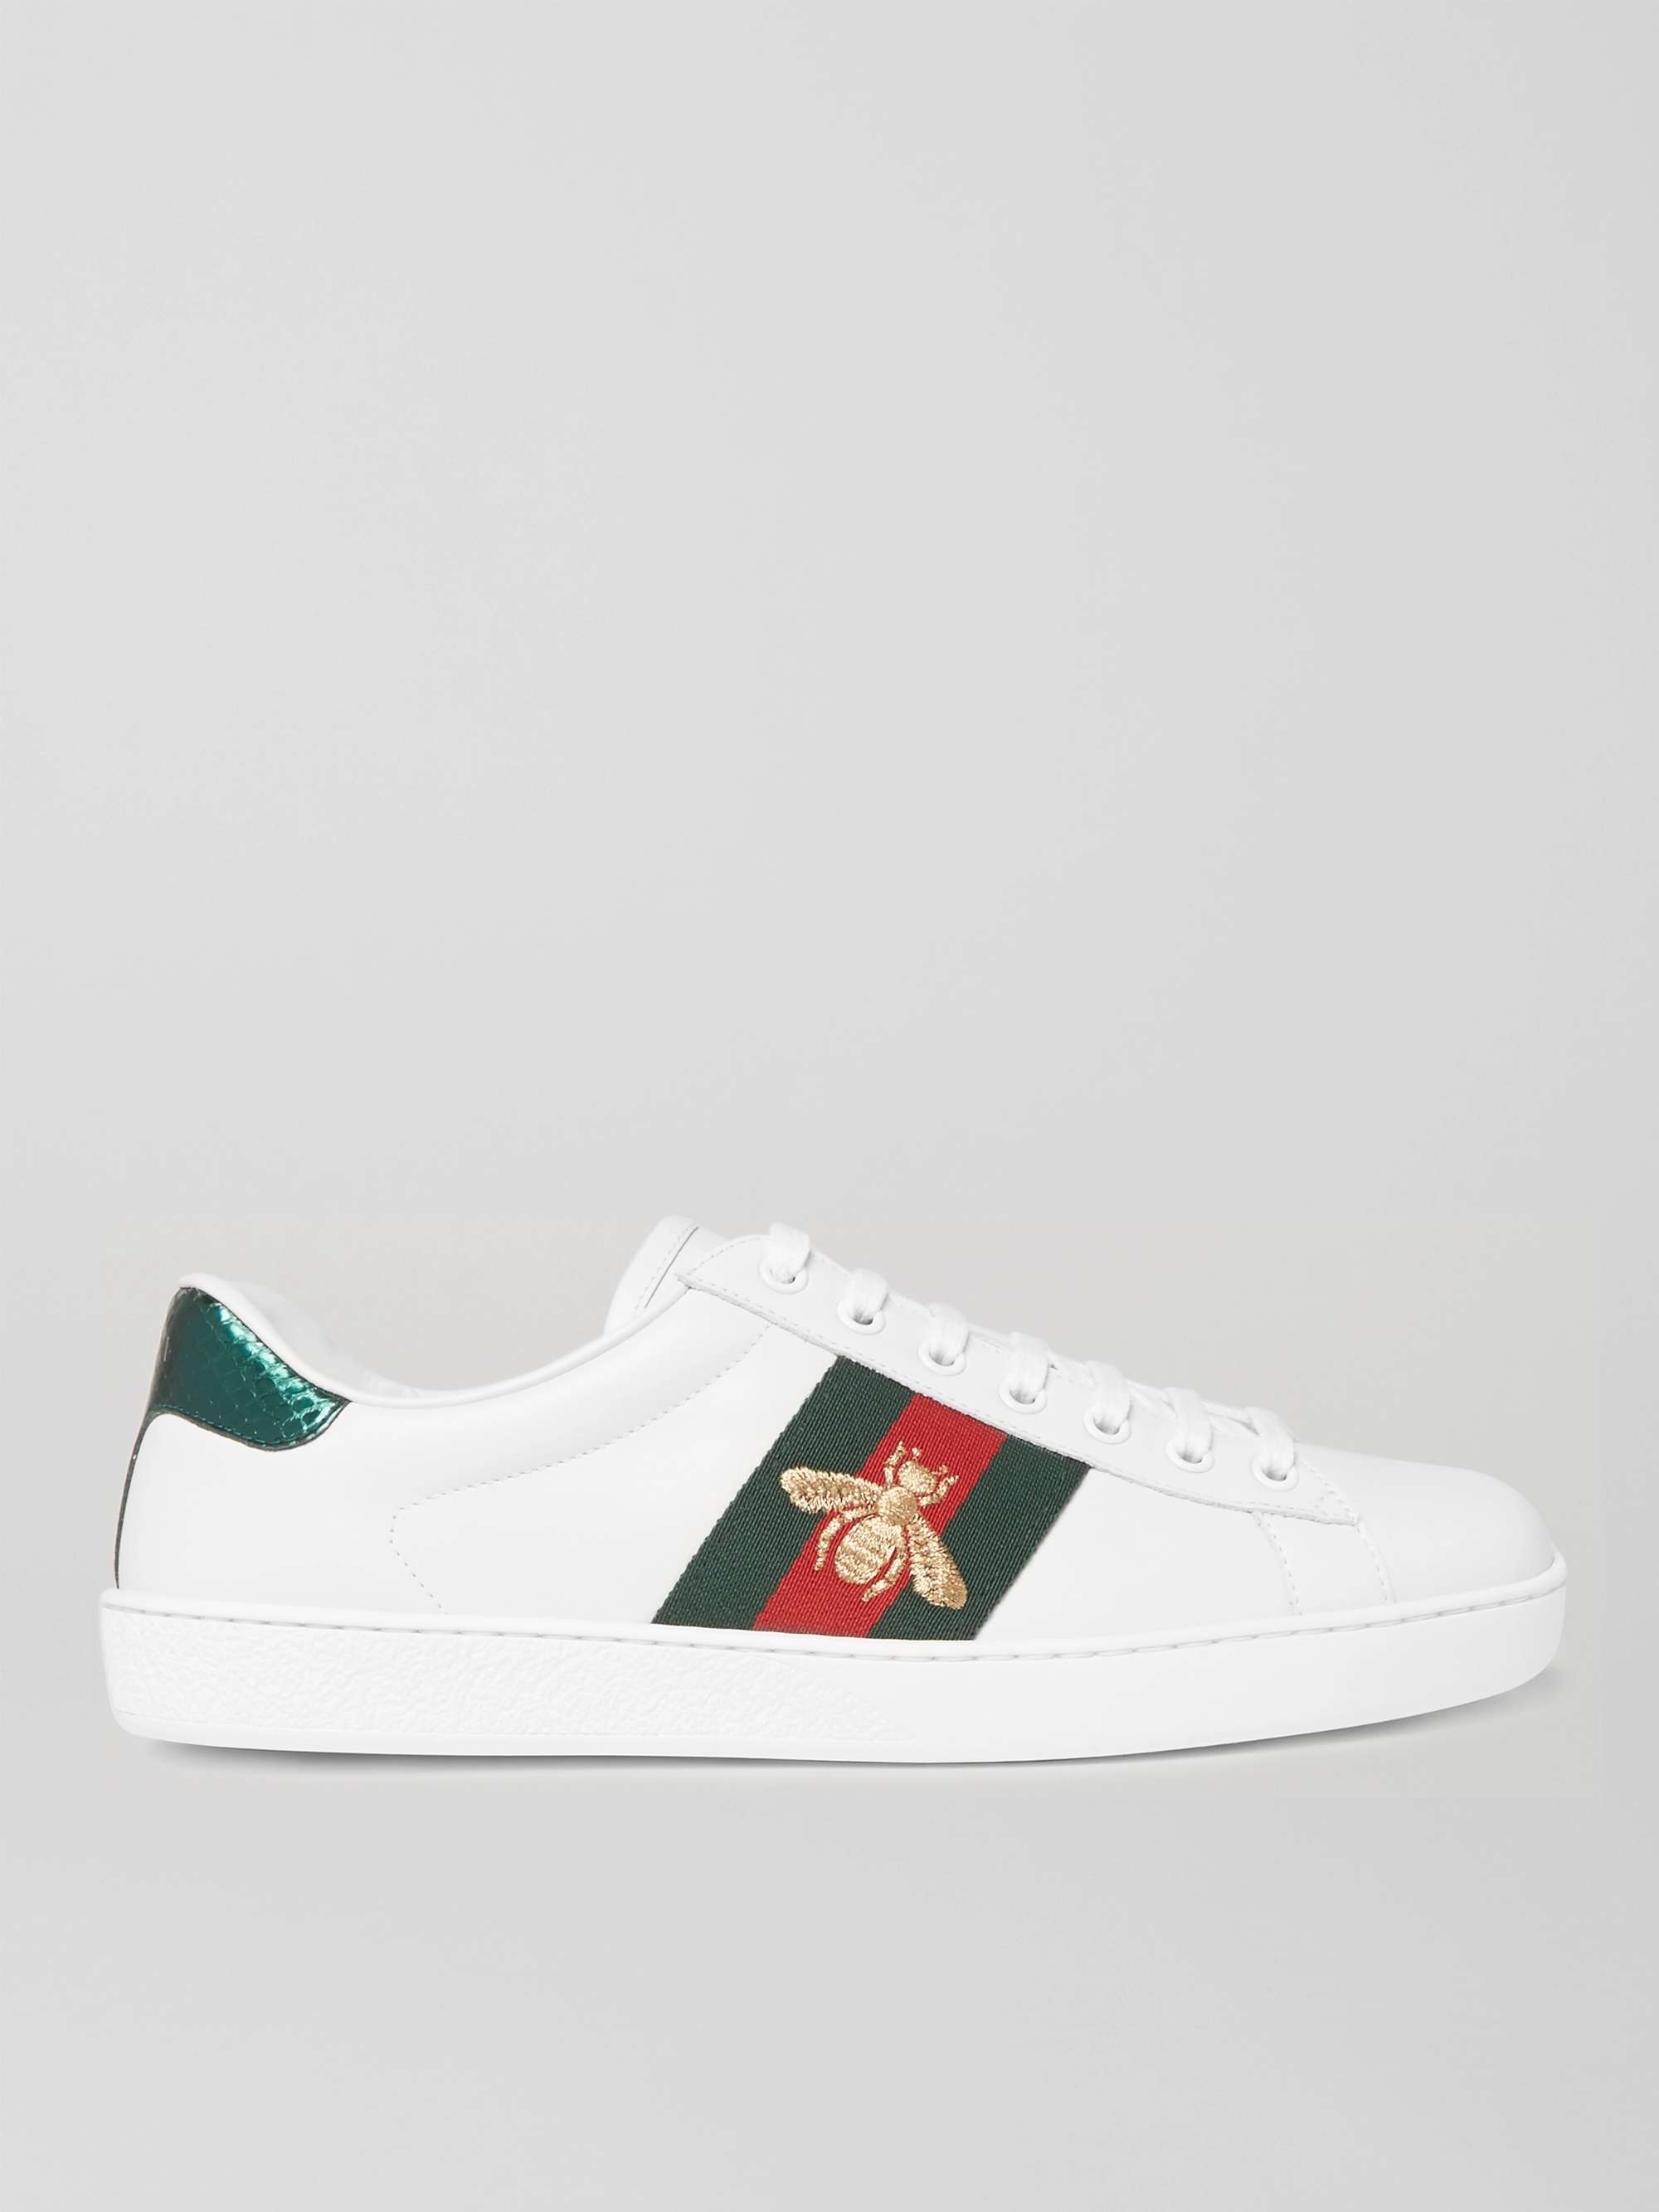 GUCCI Ace Crocodile-Trimmed Leather Sneakers for Men | MR PORTER